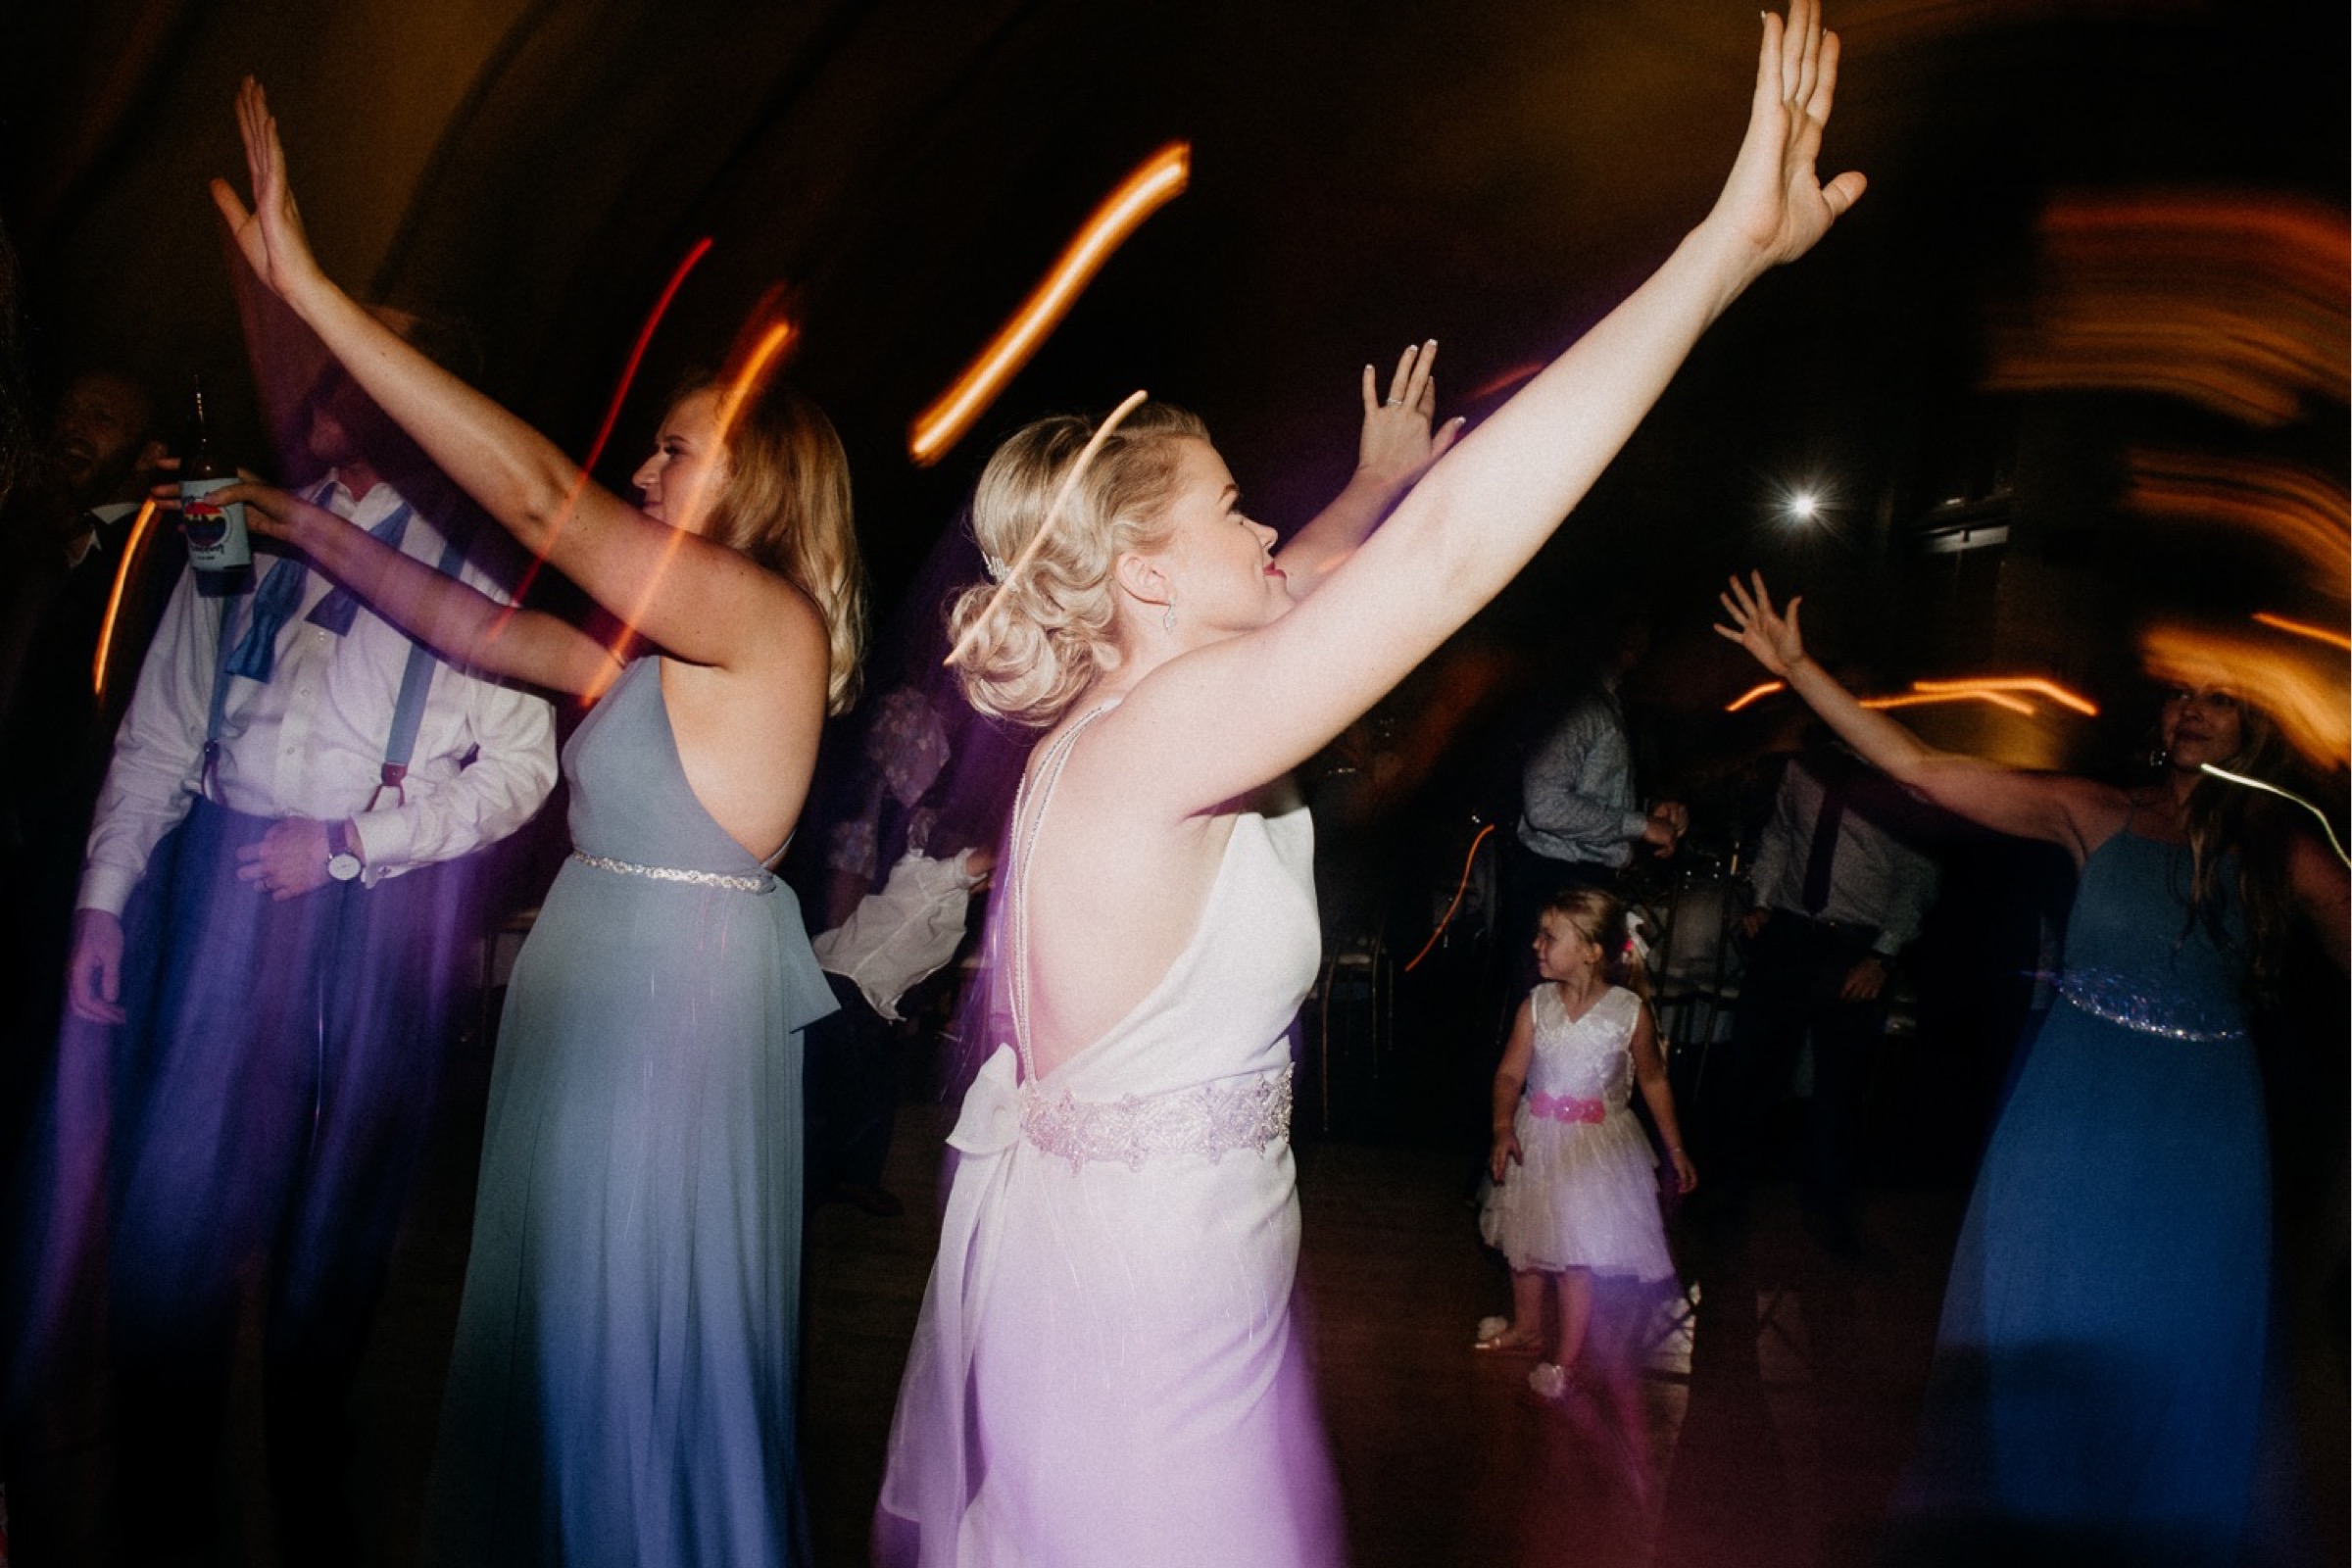 Guests and the bride dance and have fun during the reception portion of the wedding day timeline